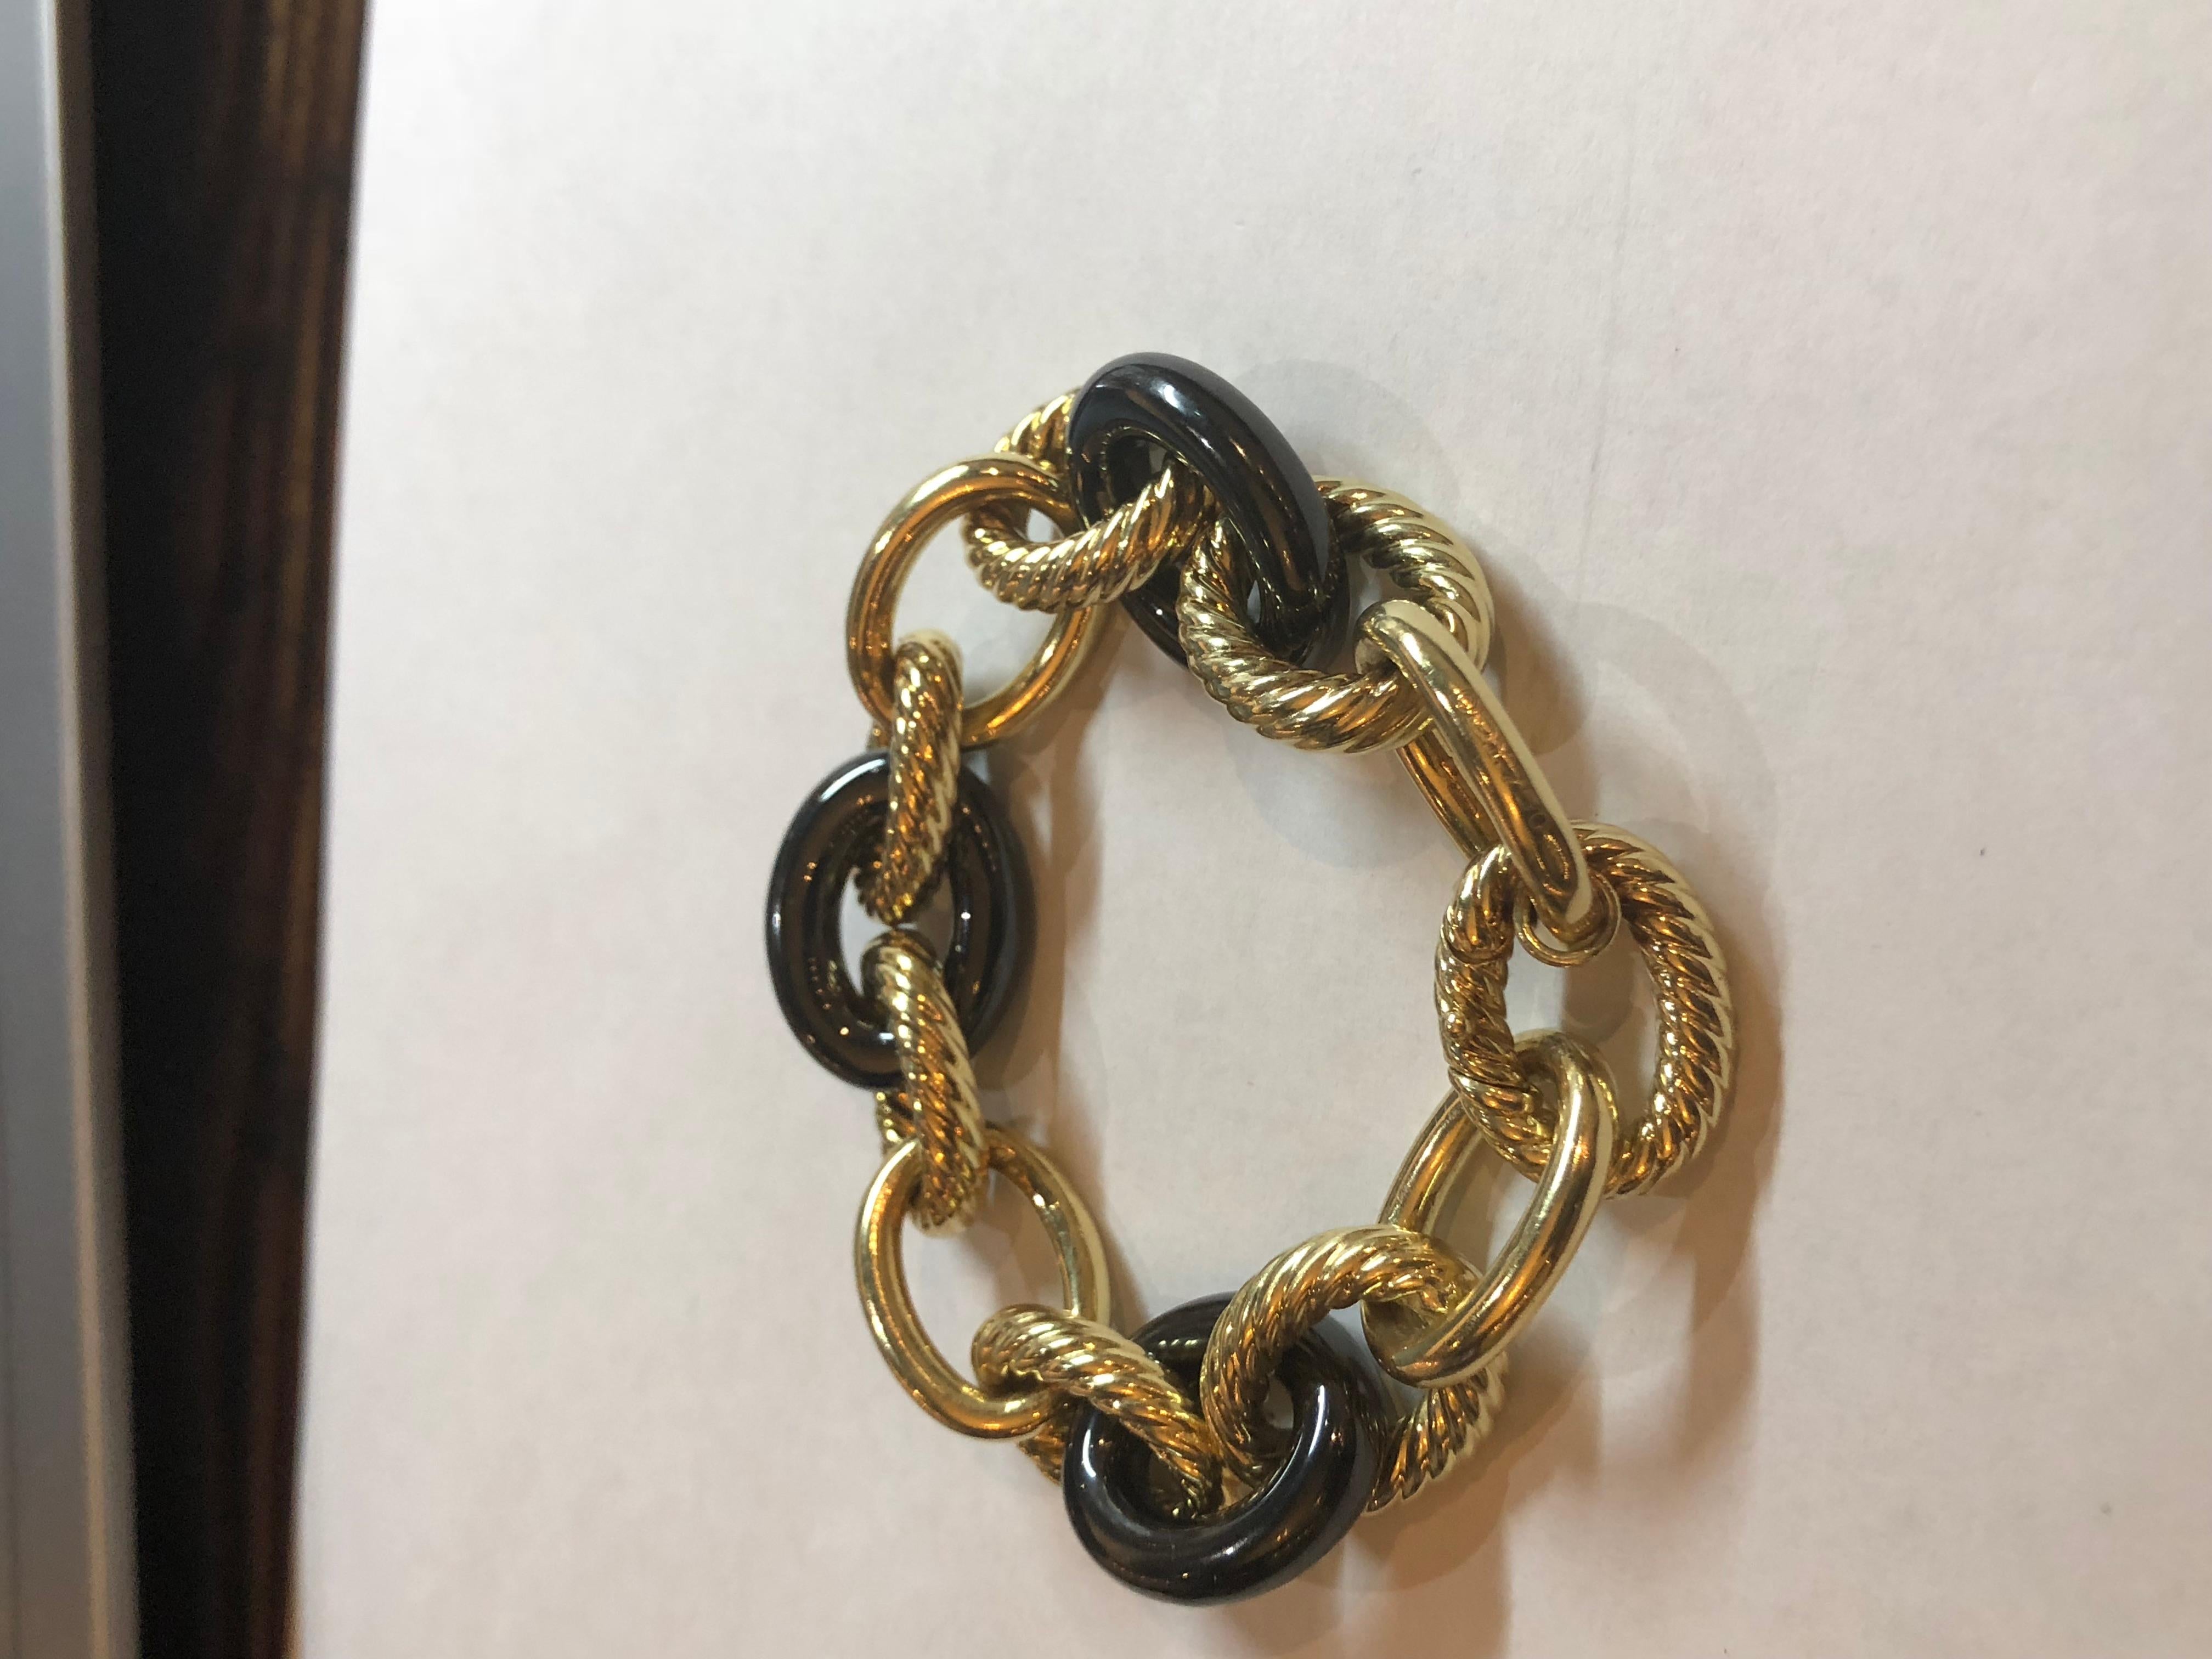 David Yurman Large Oval Link 18k Yellow gold and Hematite Bracelet
59.5 Grams 
Signed  D.Y. 750
7.5 Inches Long